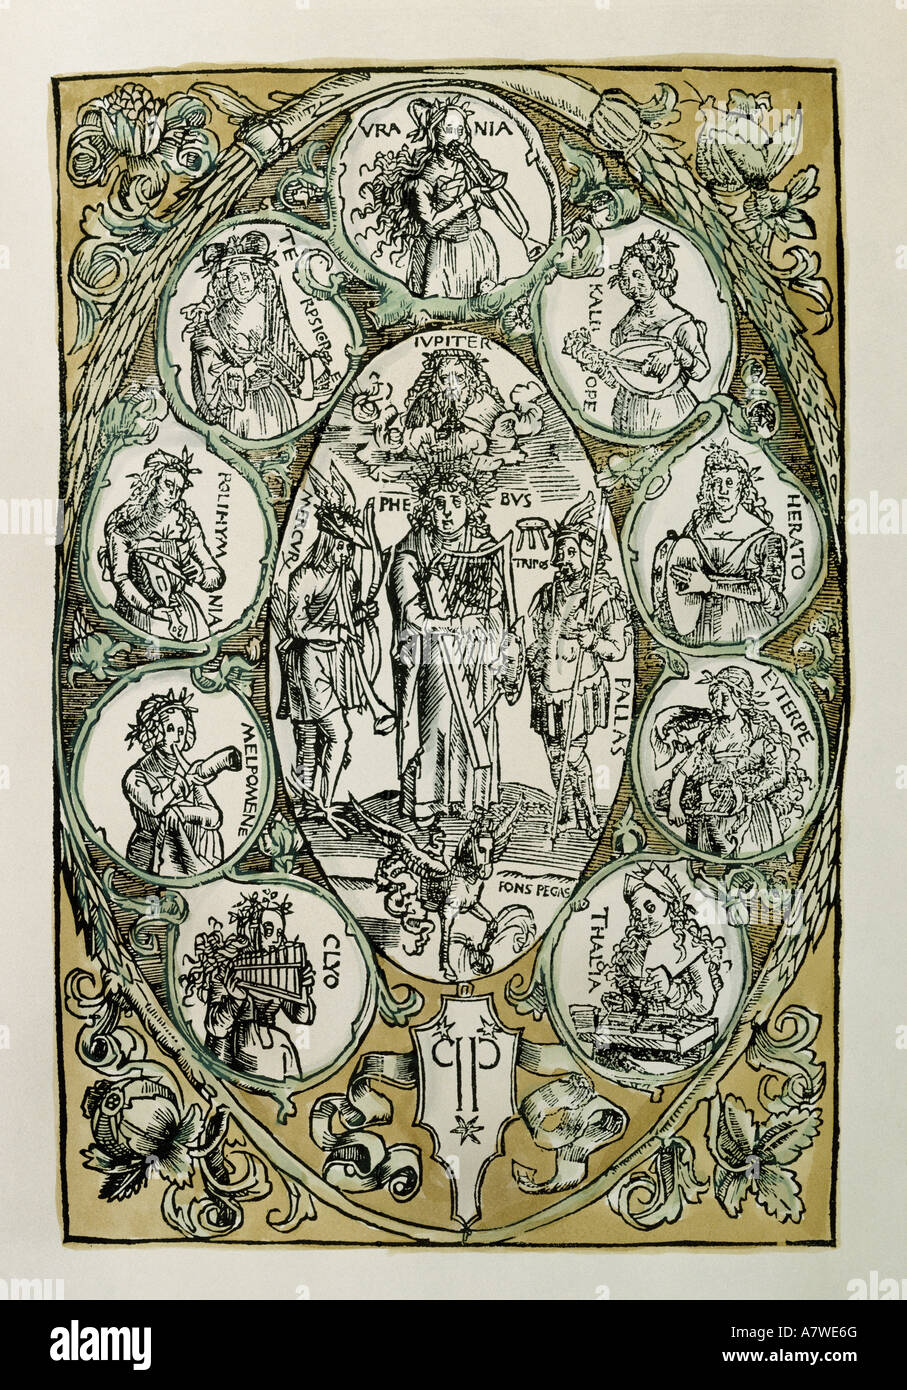 Celtis, Conrad, 1.2.1459 - 4.2.1508, German author / writer, humanist, works, musical version of the odes of Horace, 1540/1550, illustration, woodcut, Apollo surrounded by the muses, private collection, Stock Photo